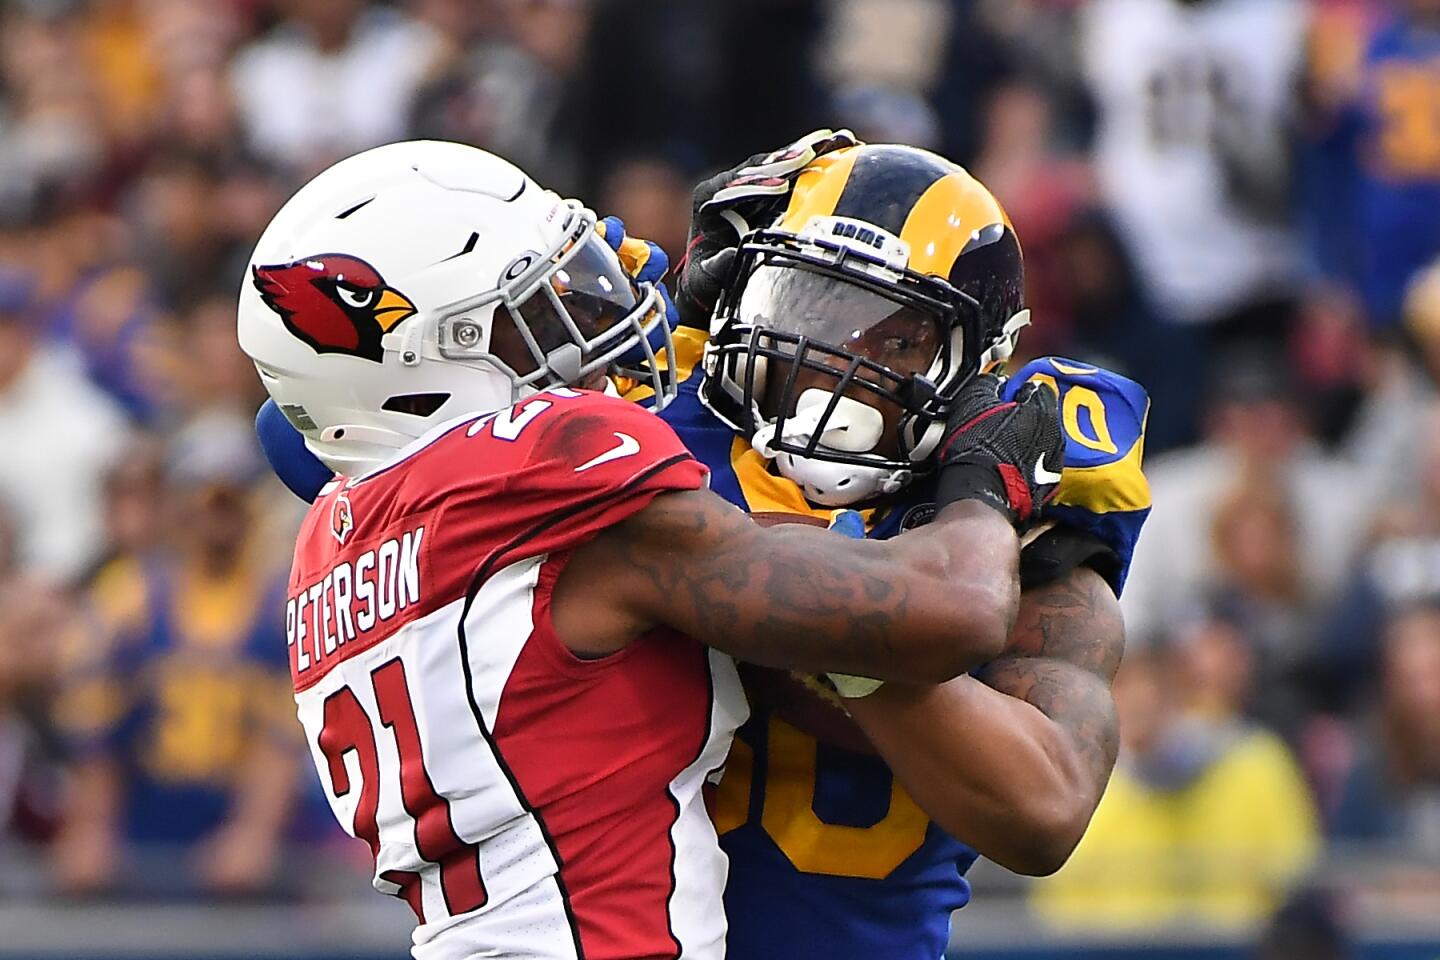 Rams running back Todd Gurley is stopped for a loss by Arizona Cardinals cornerback Patrick Peterson during the third quarter.